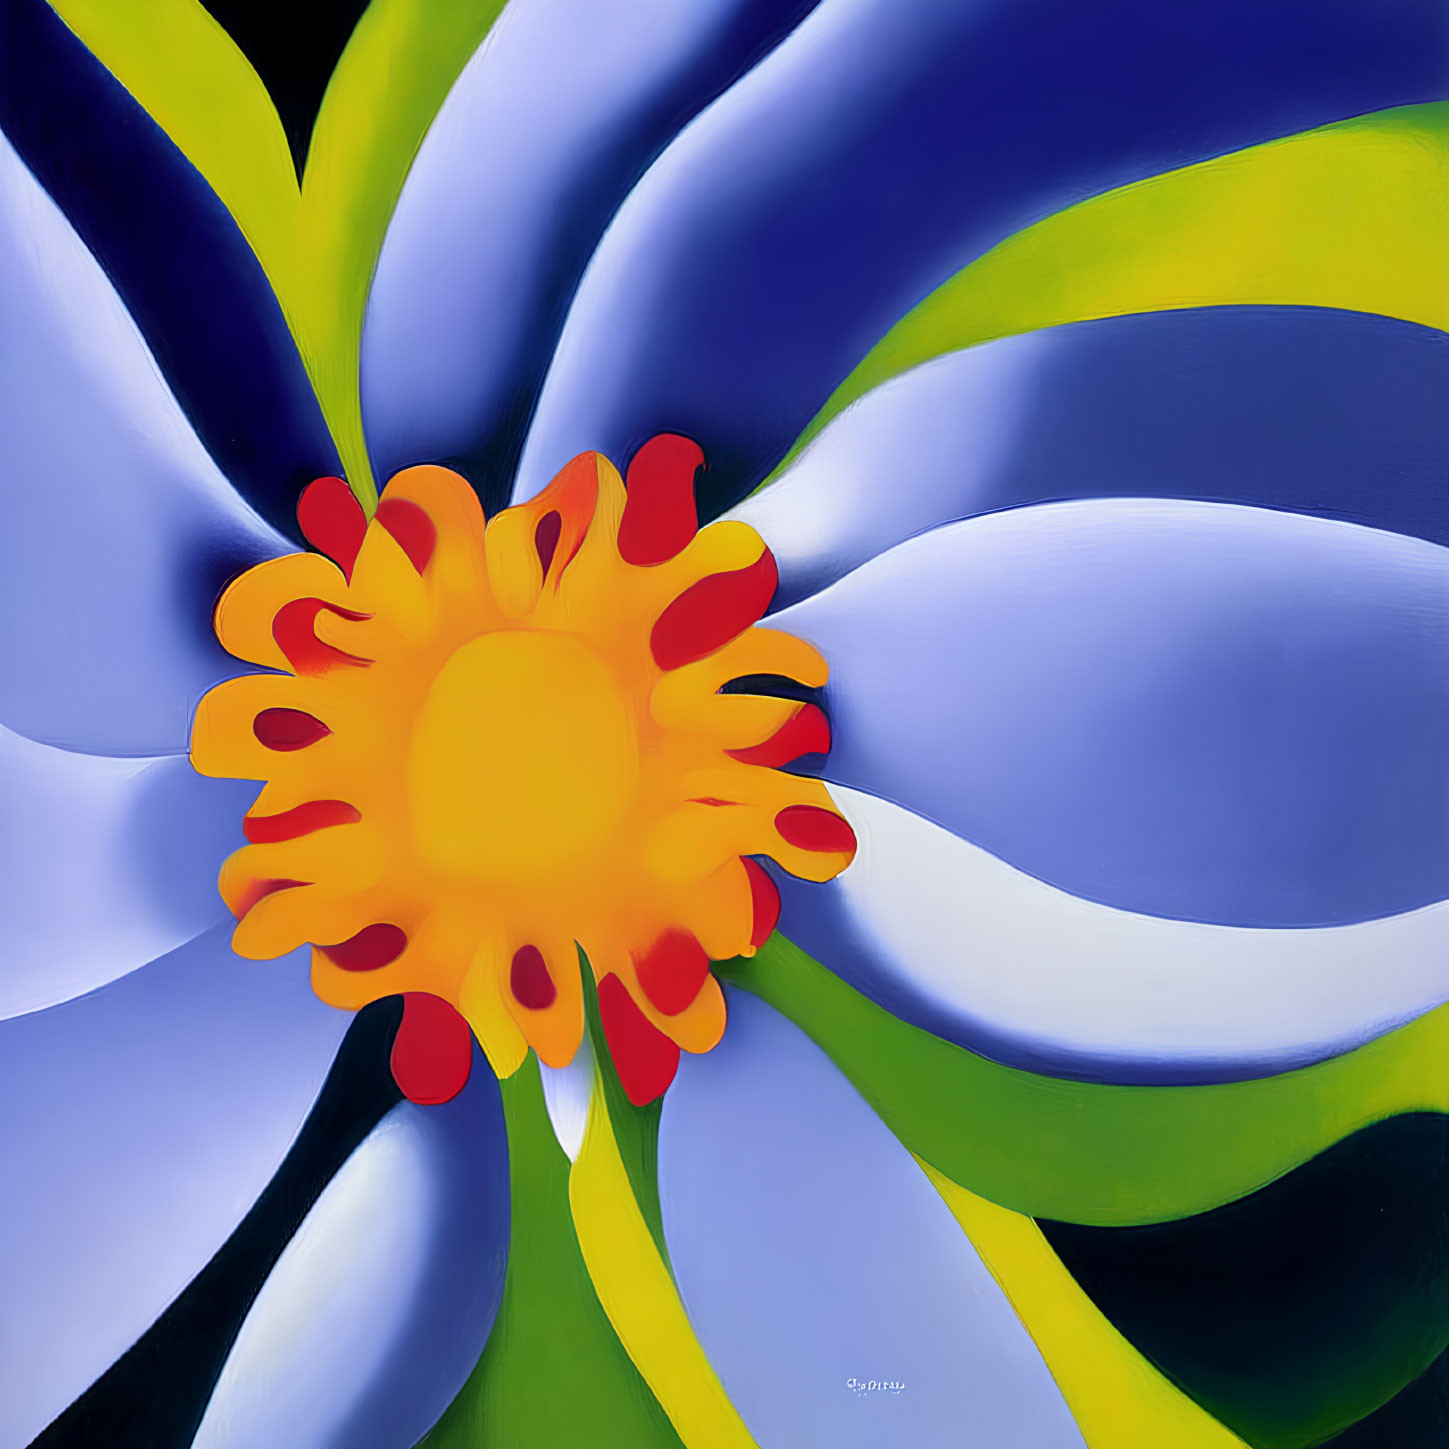 Colorful Stylized Flower Painting with Blue and White Petals